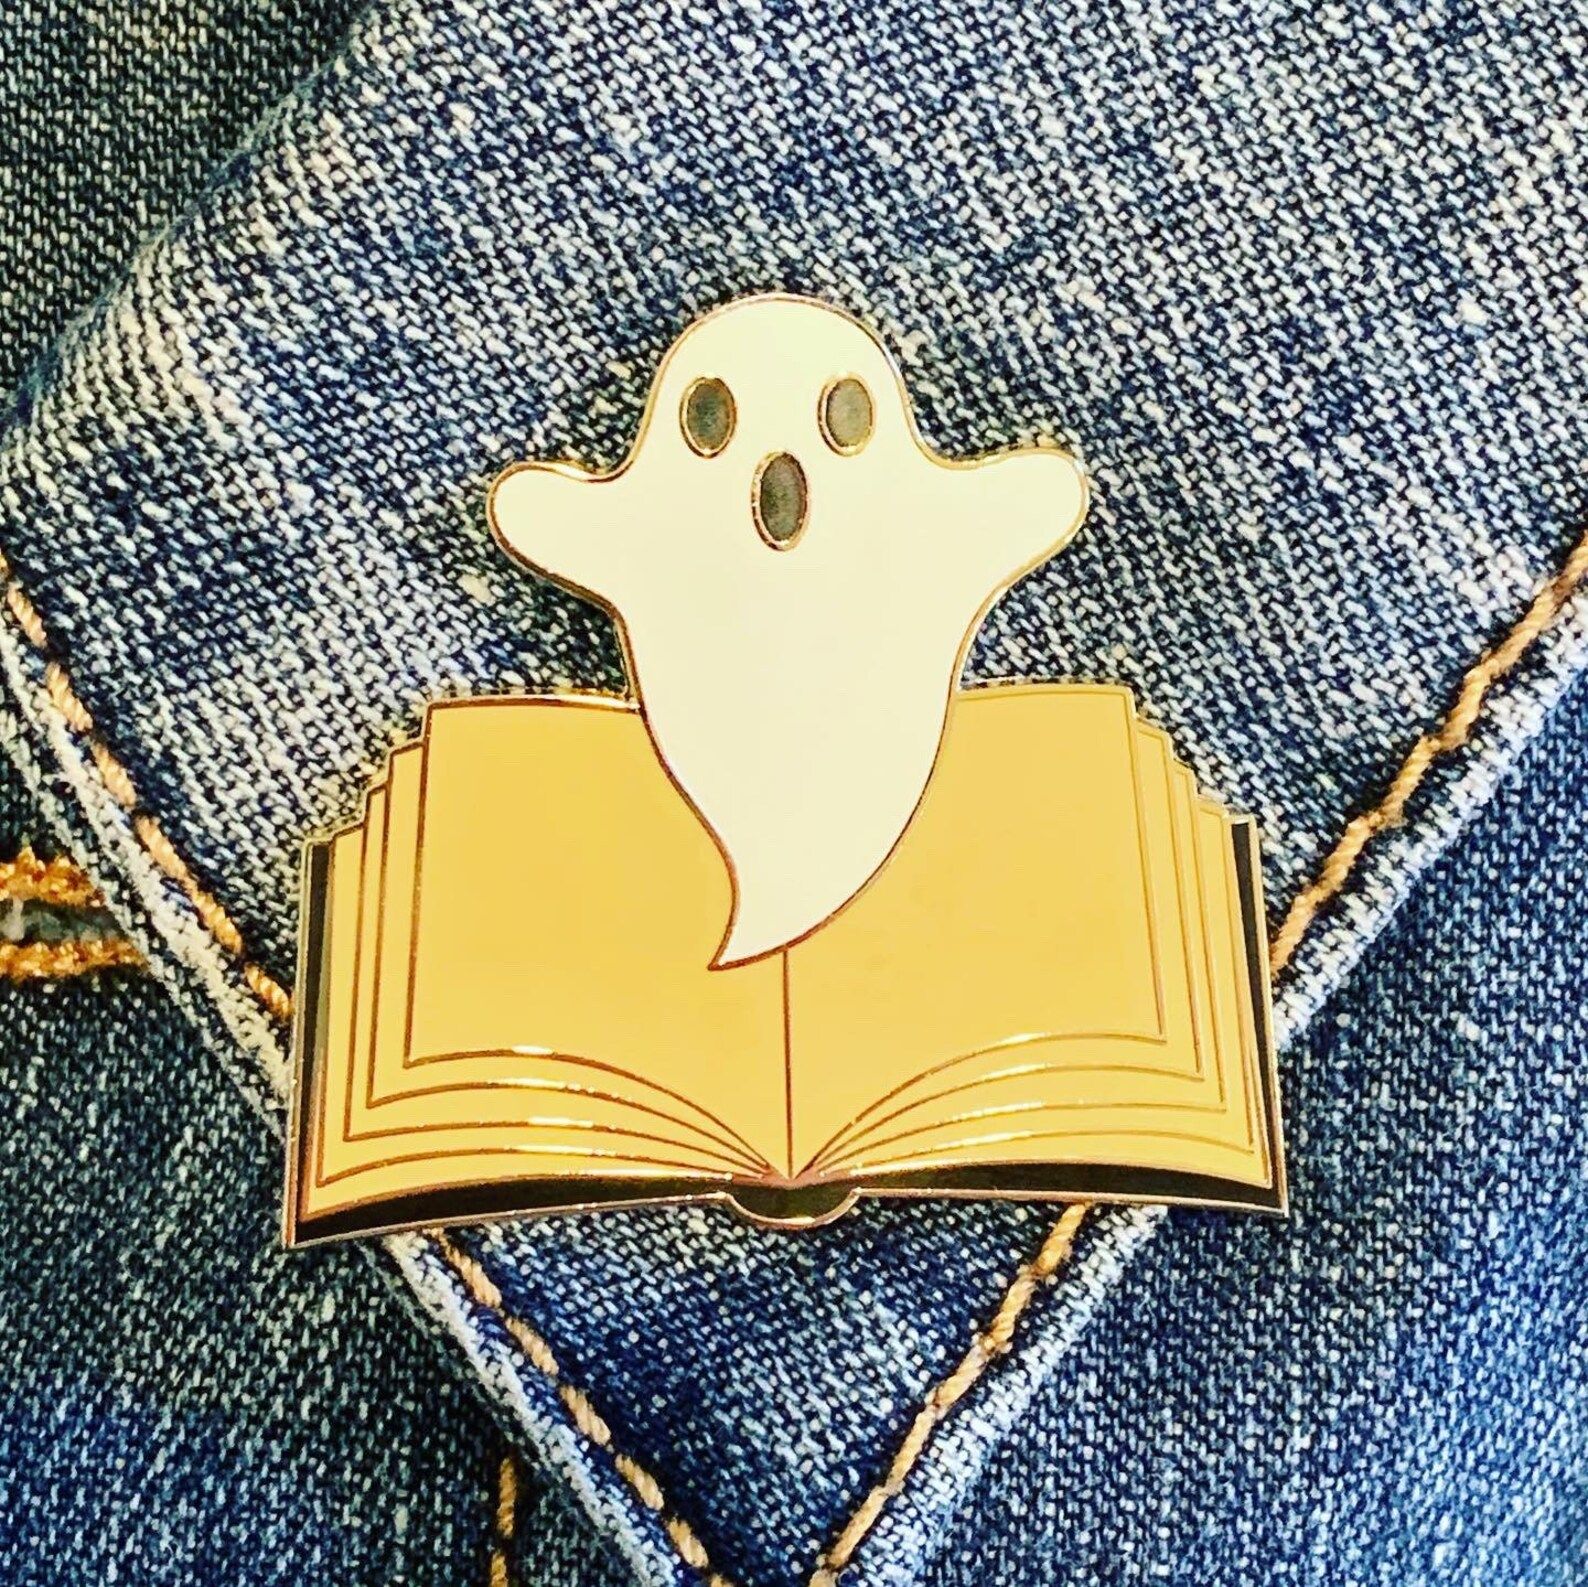 A pin of a small white ghost floating out of an open book.